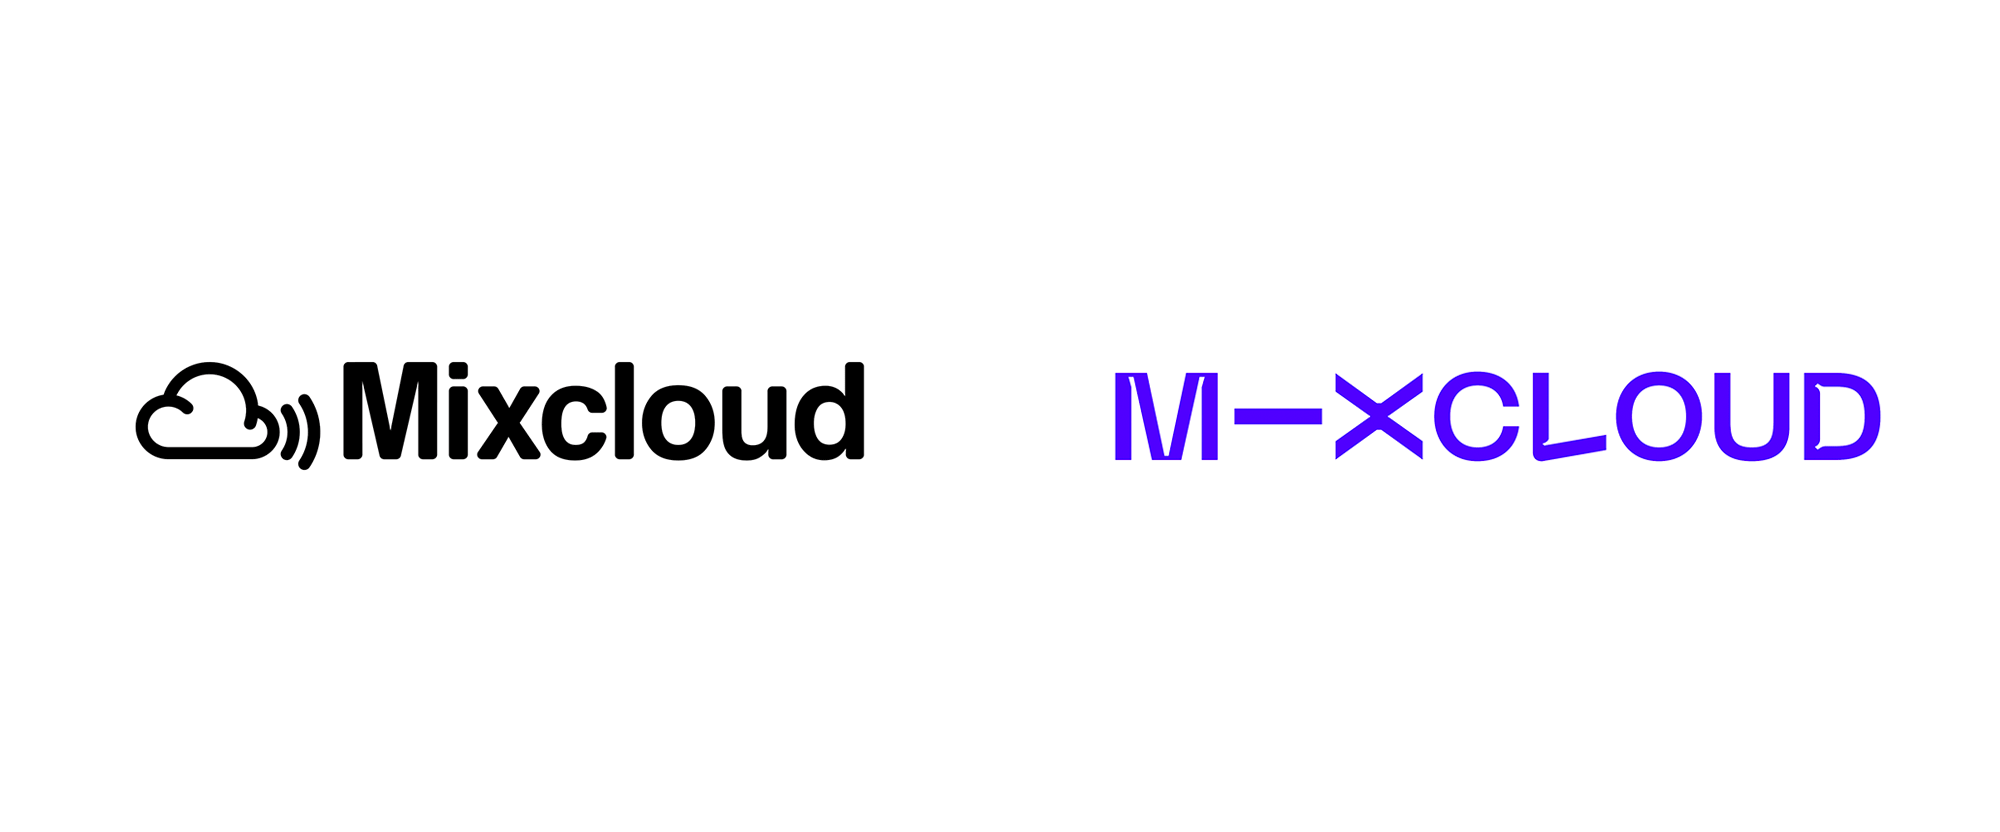 New Logo and Identity for Mixcloud by Output